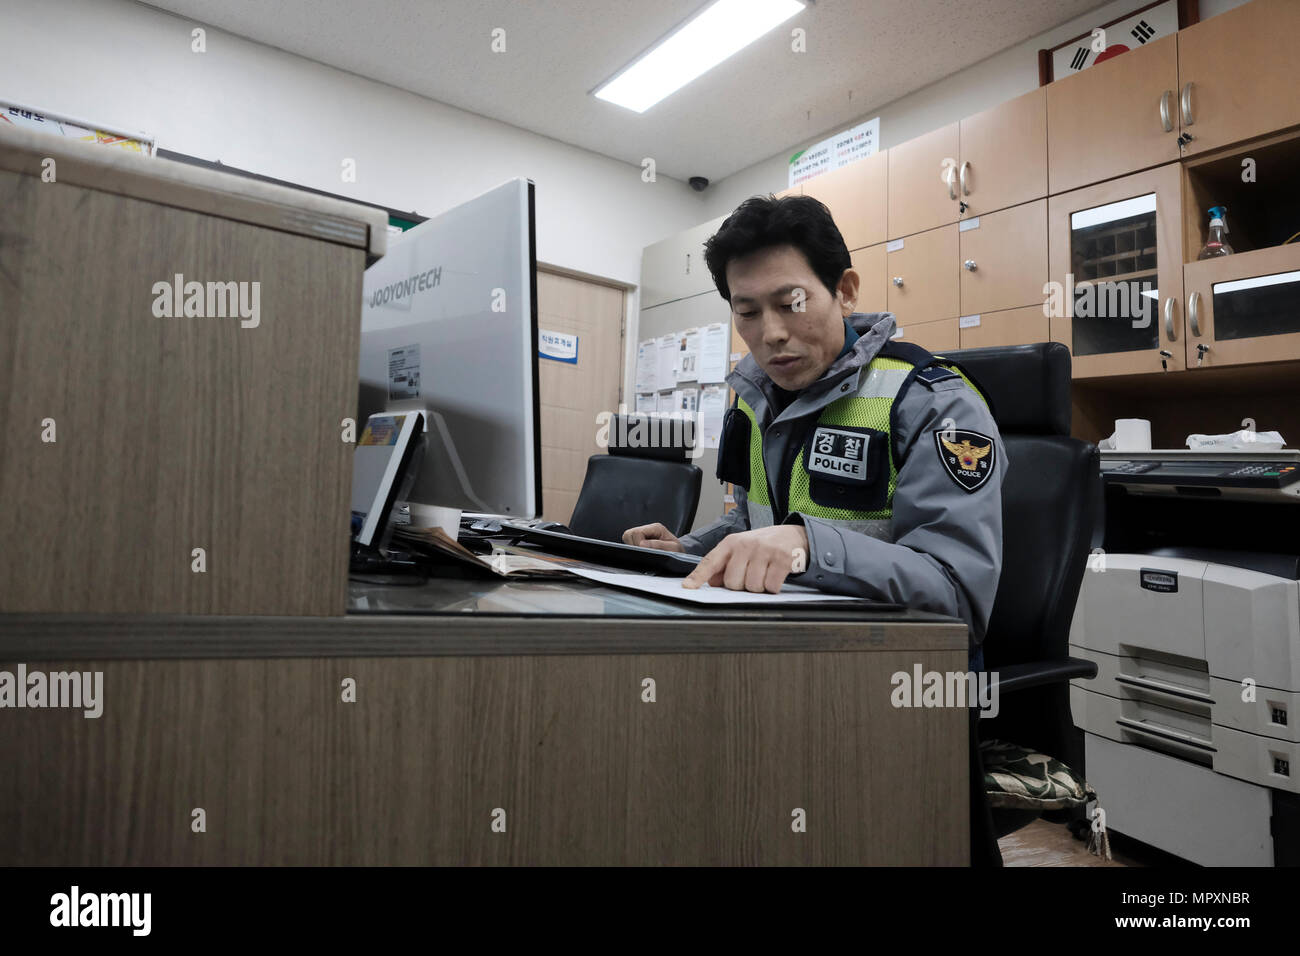 A South Korean policeman filling up a report in a police station in the city of Seoul capital of the Republic of Korea commonly known as South Korea. Stock Photo